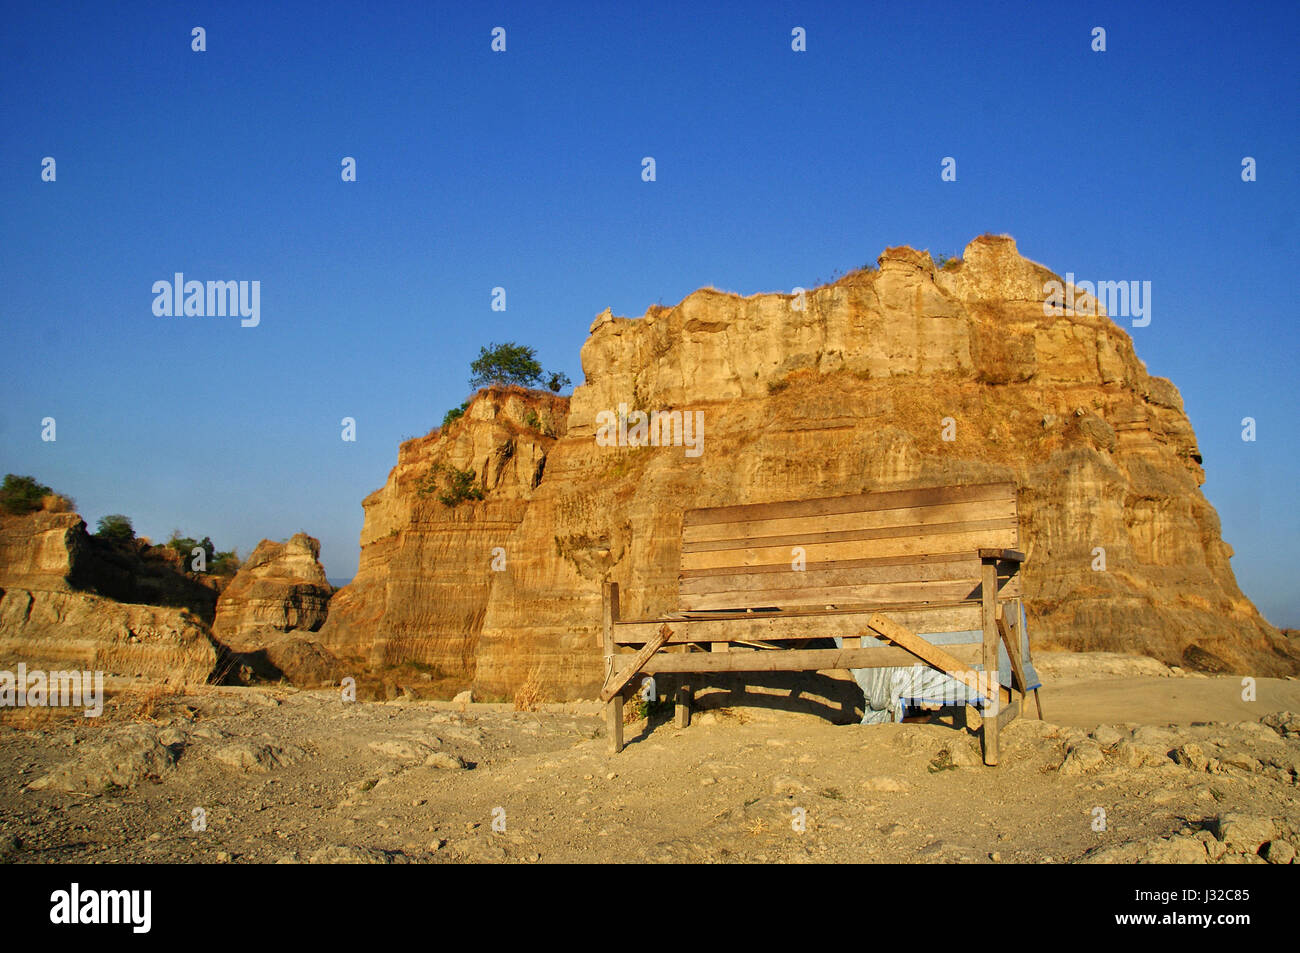 Brown Canyon wich is located in Semarang, Central Java has a beautiful views and stunning rocks formation Stock Photo